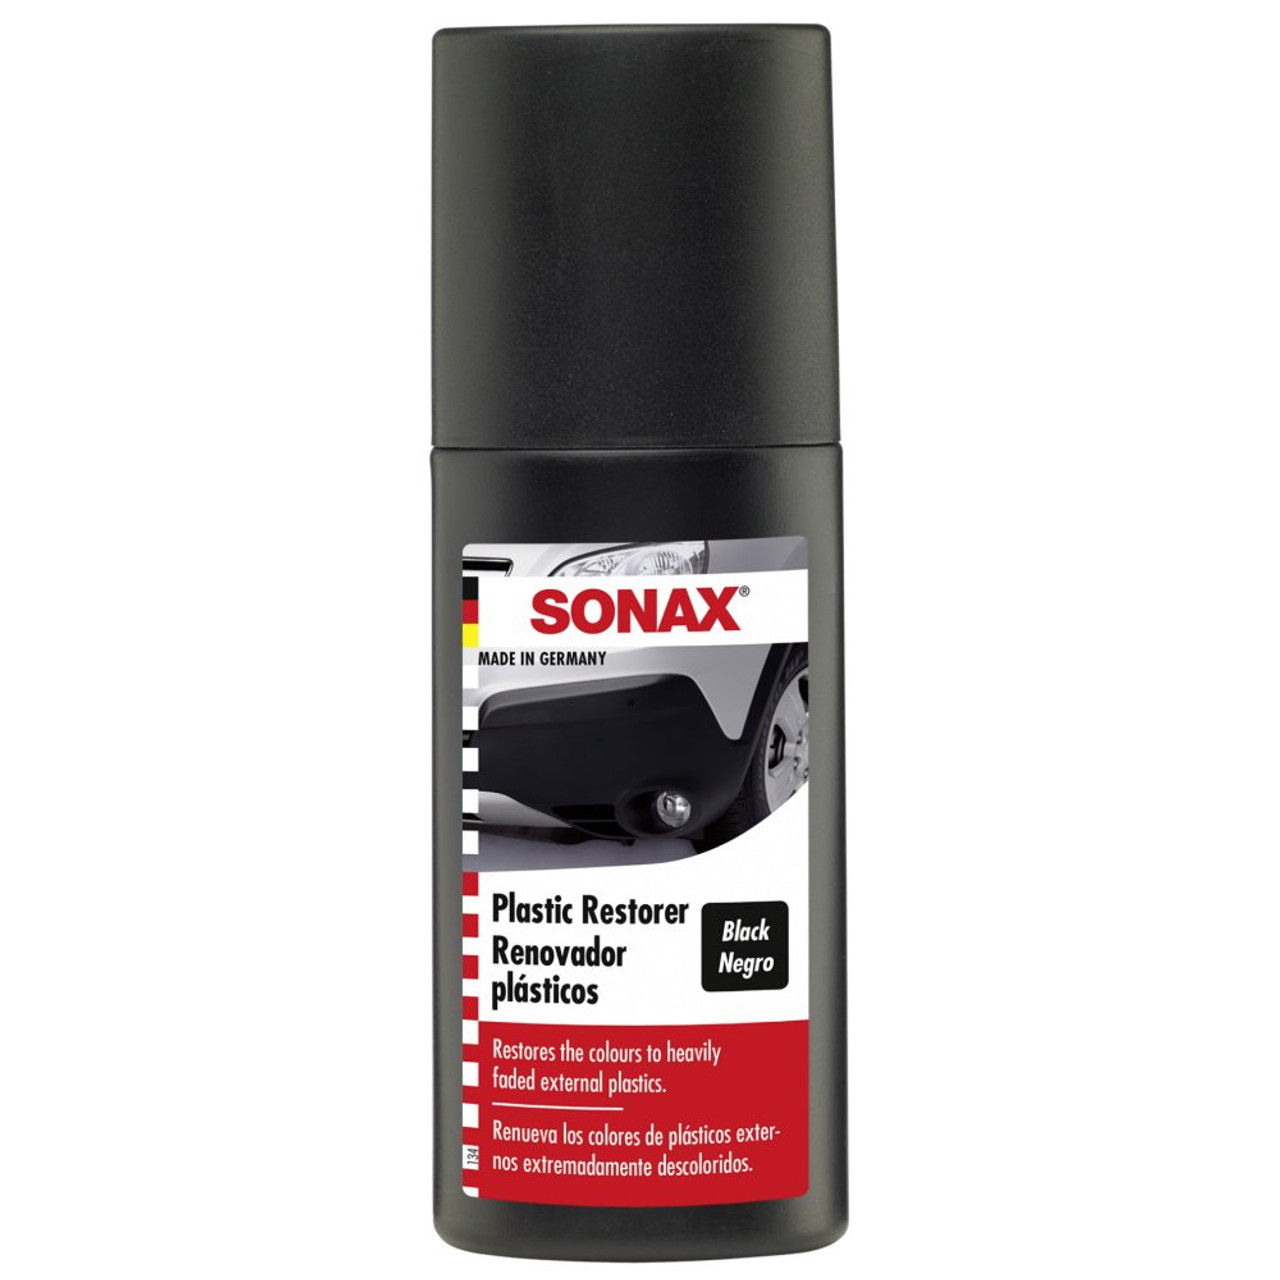 SONAX Plastic Restorer Gel. Professional Detailing Products, Because Your  Car is a Reflection of You